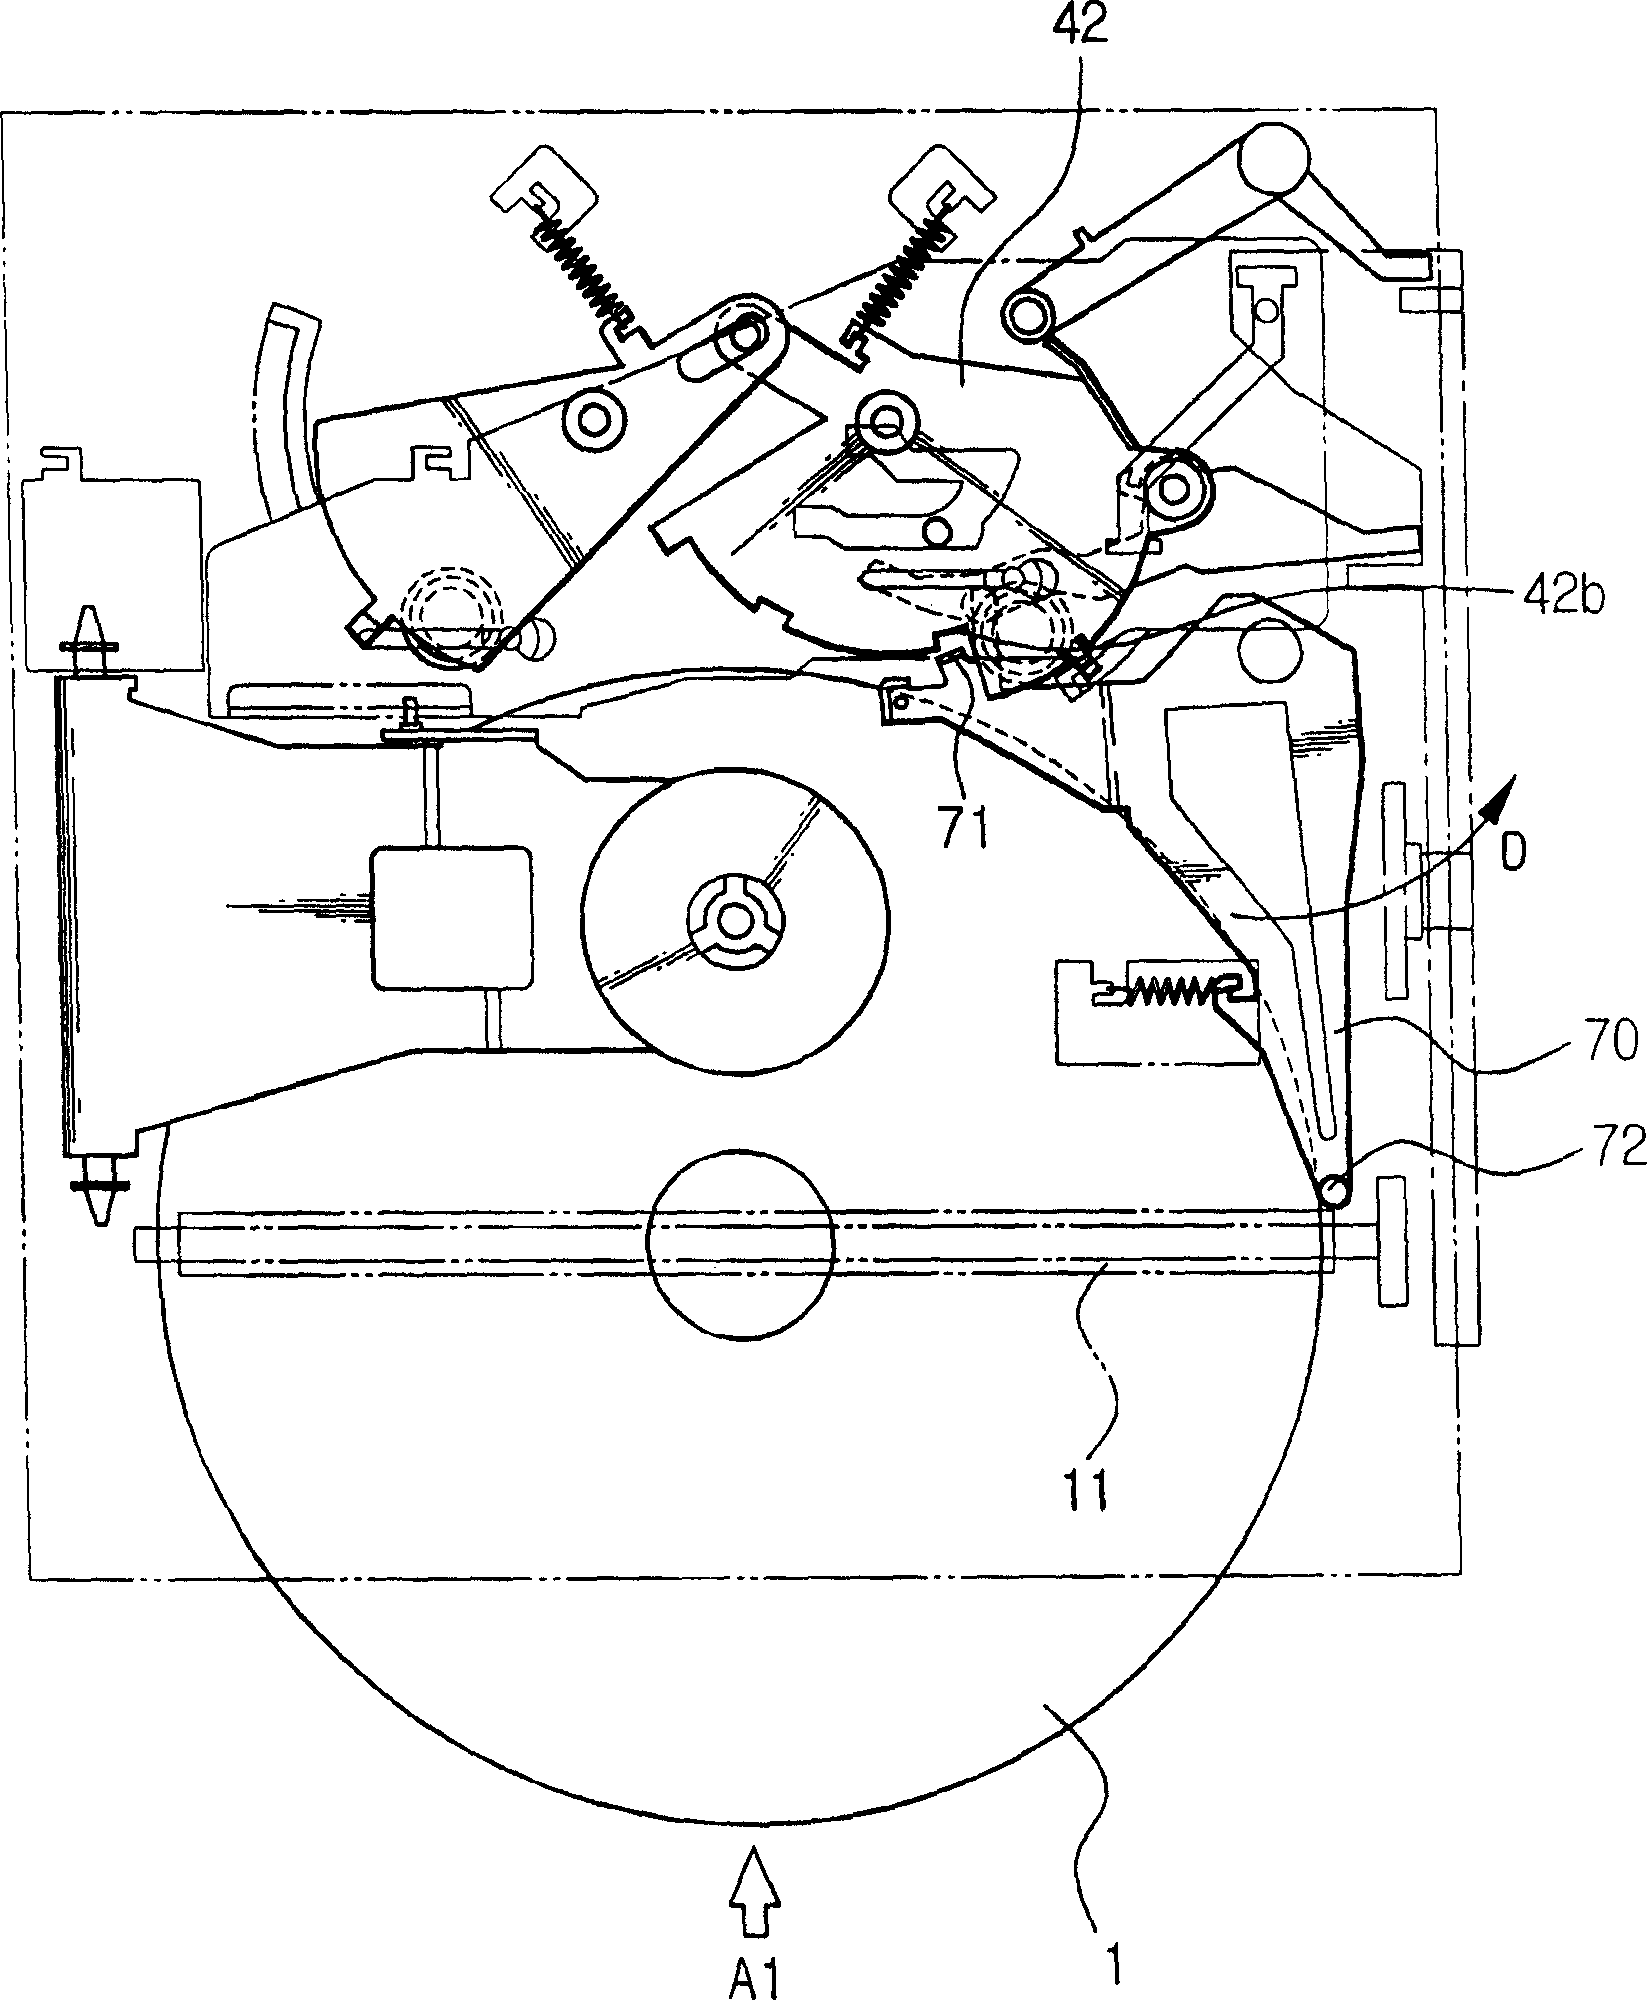 Apparatus for loading a disk in an optical disk player